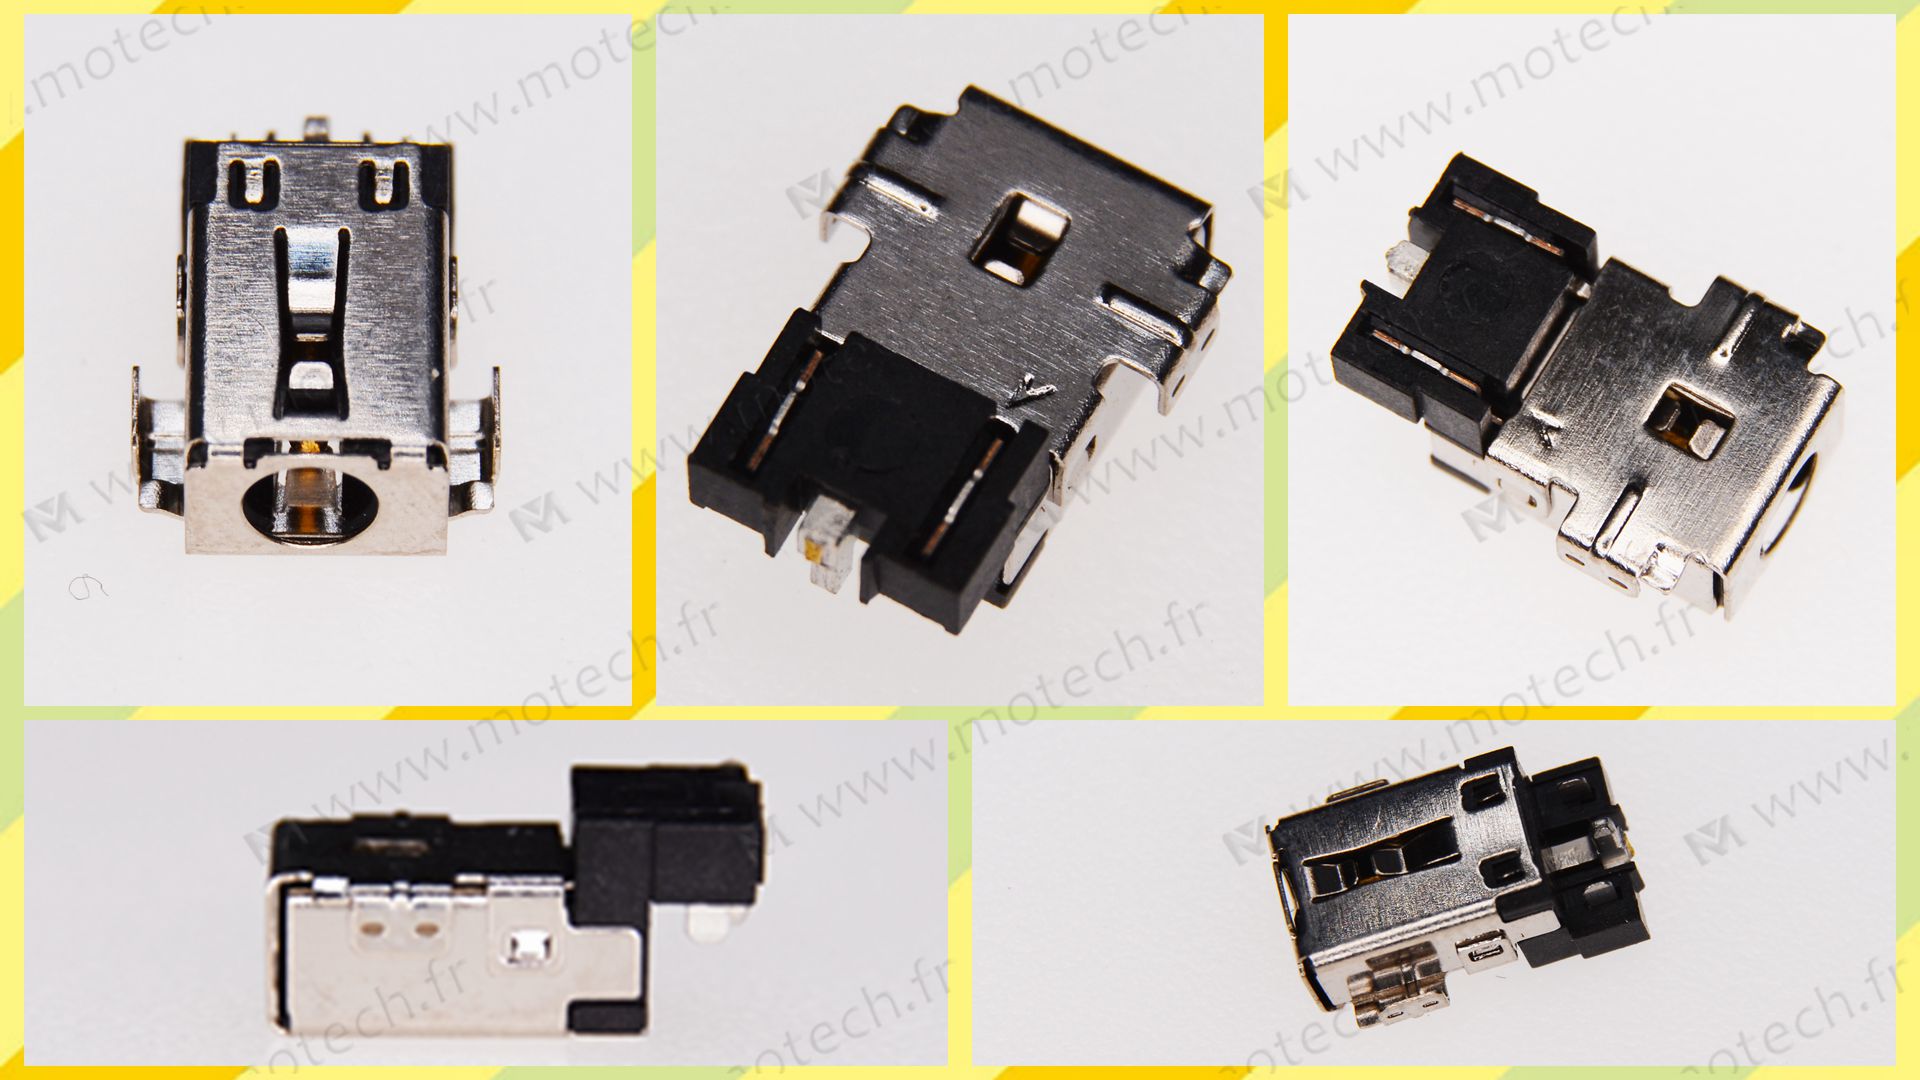 Acer P614-51TG charging connector, Acer P614-51TG DC Power Jack, Acer P614-51TG Power Jack, Acer P614-51TG plug, Acer P614-51TG Jack socket, Acer P614-51TG connecteur de charge, 